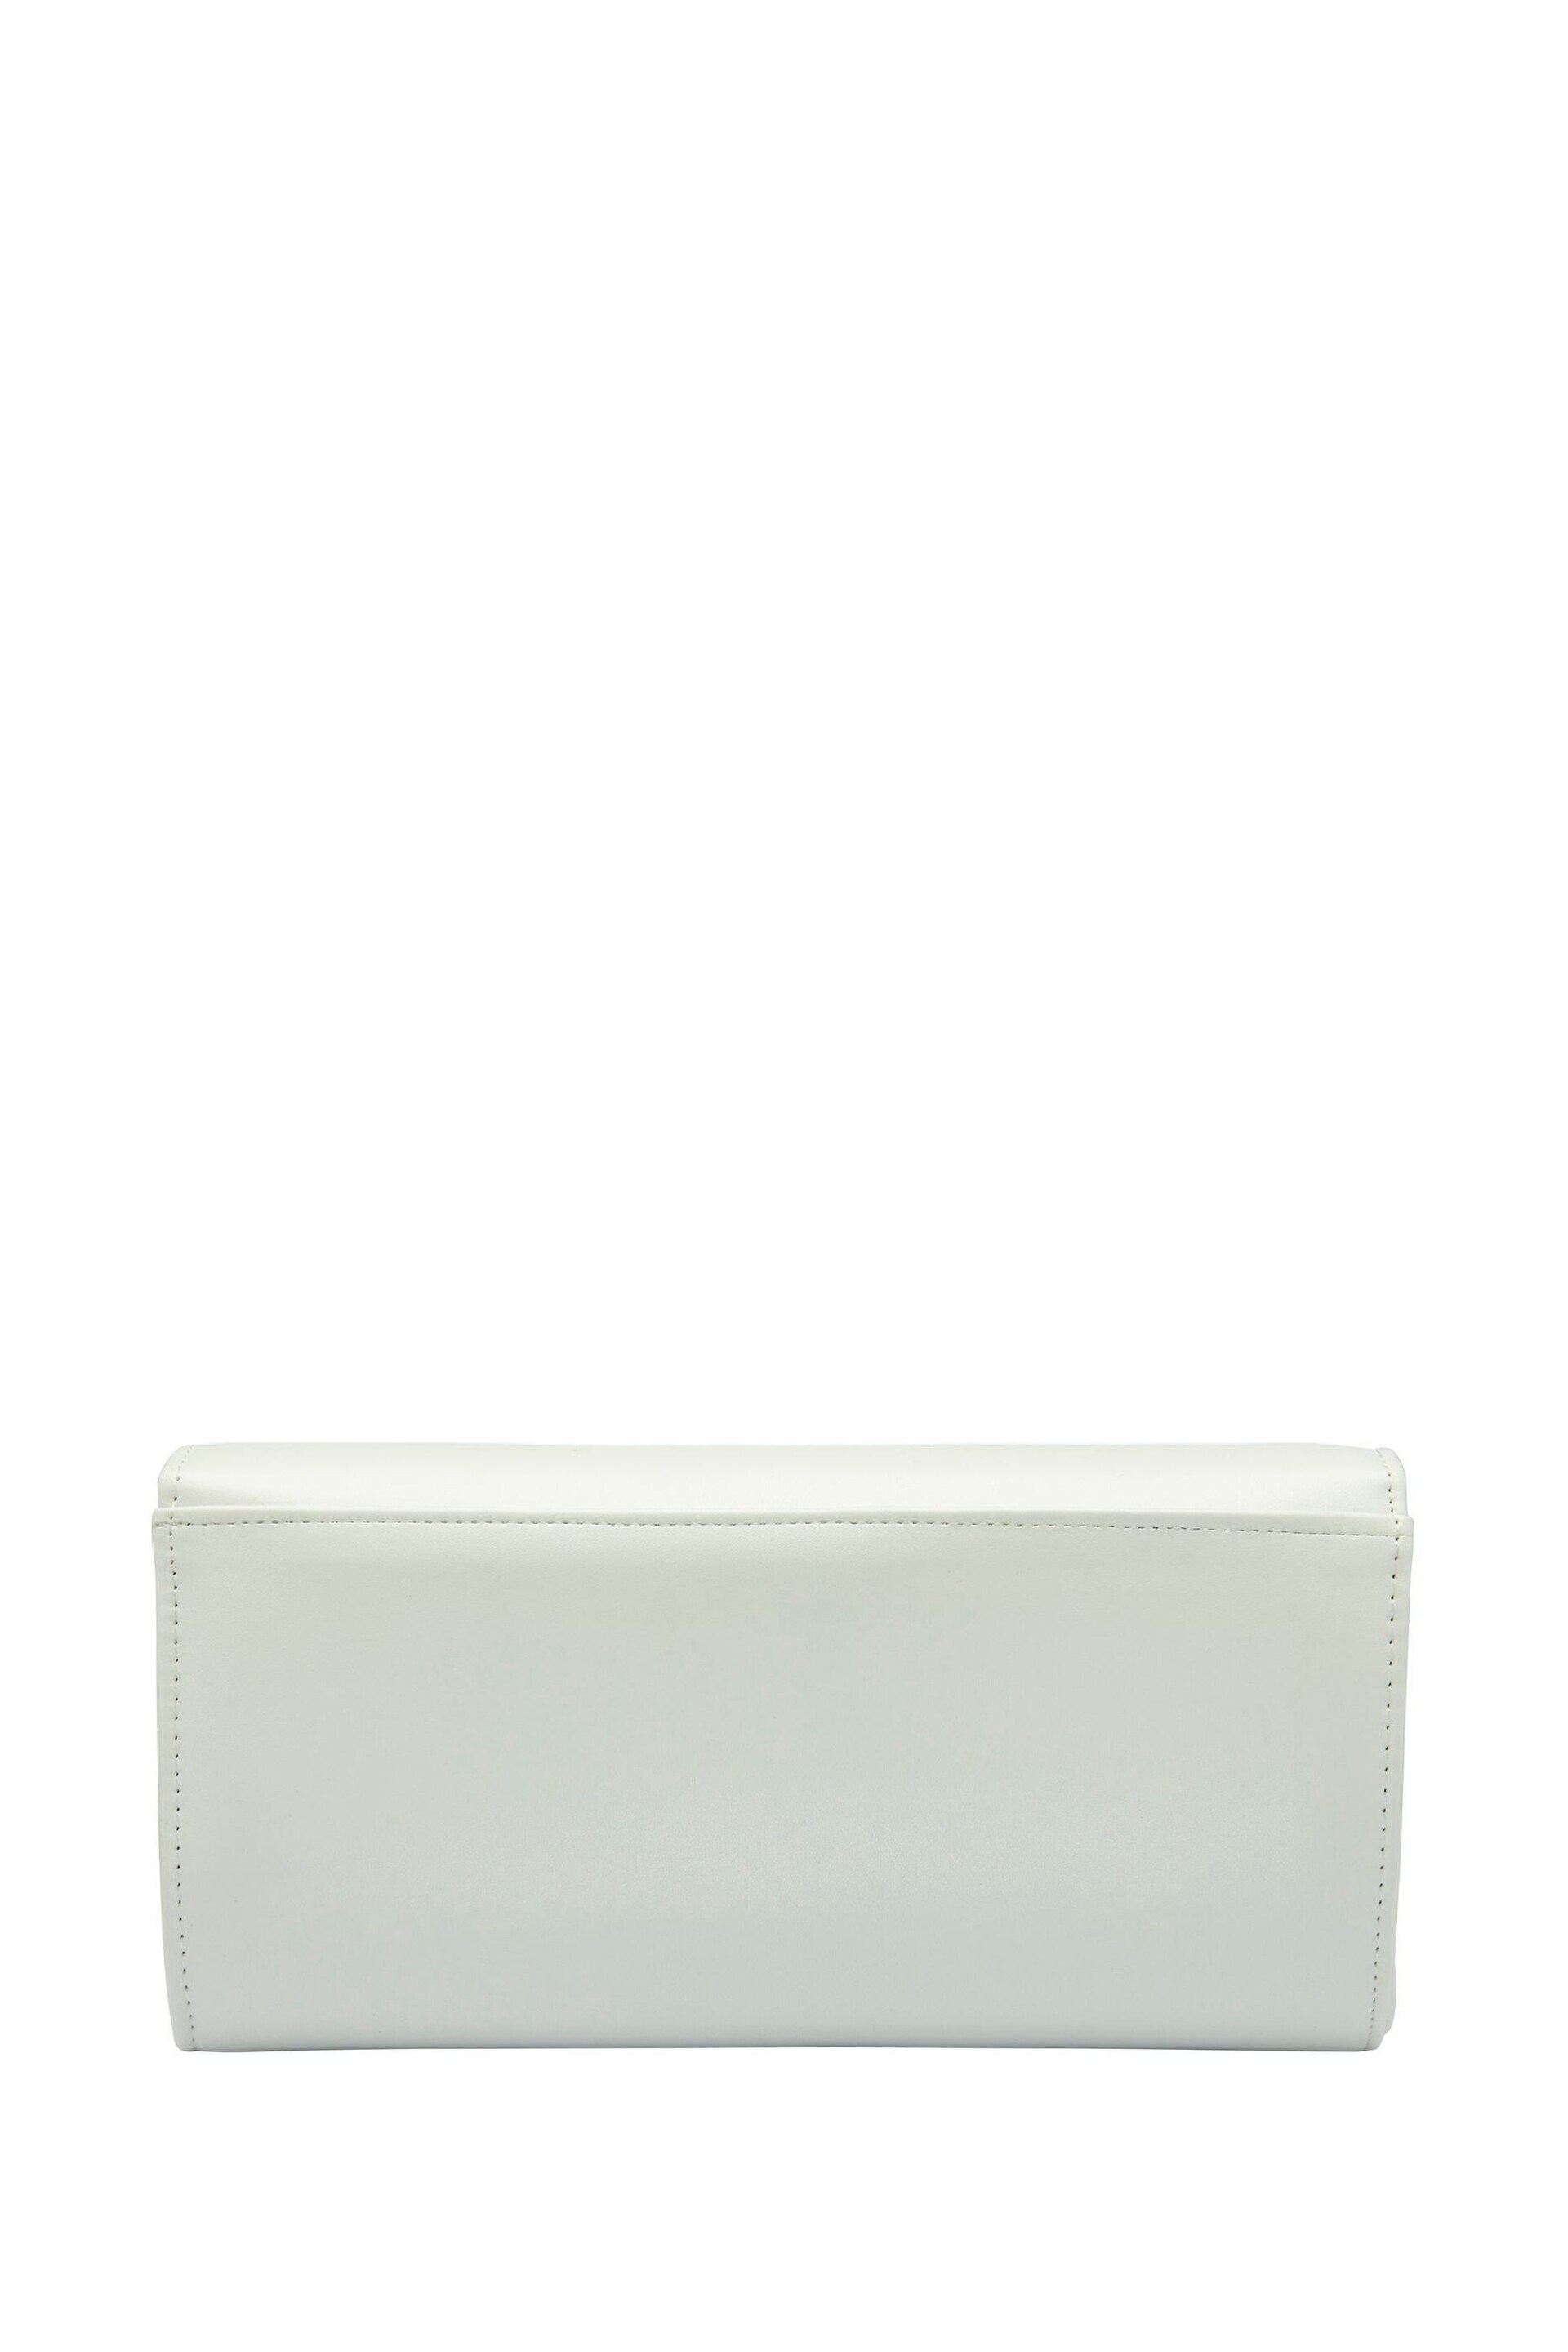 Lotus White Clutch Bag With Chain - Image 2 of 4